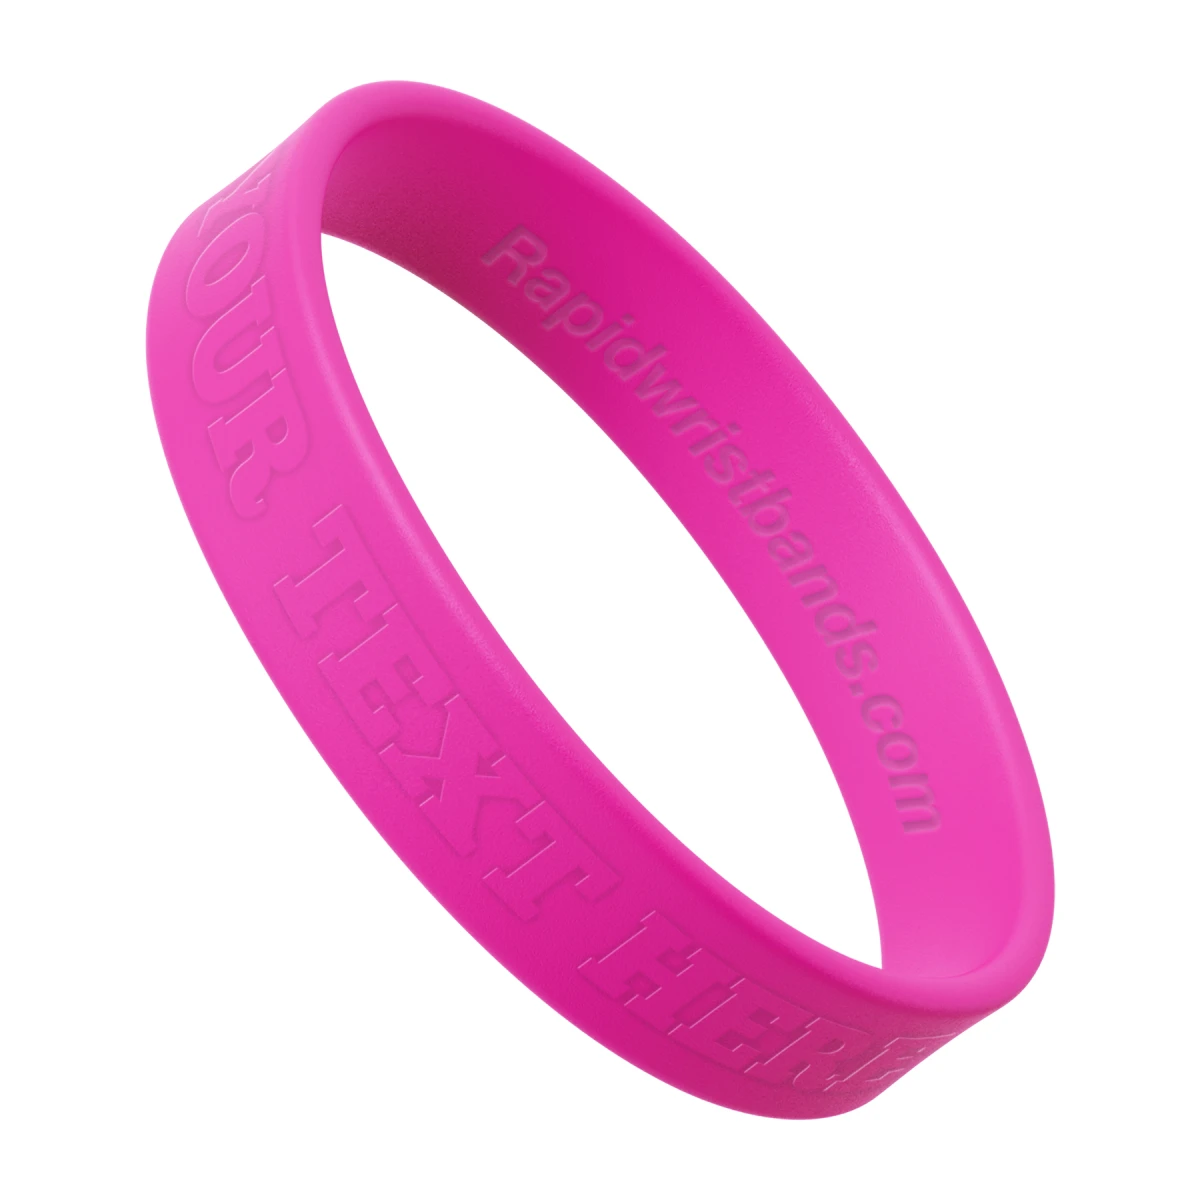 Hot Pink Wristband With Your Text Here Embossed